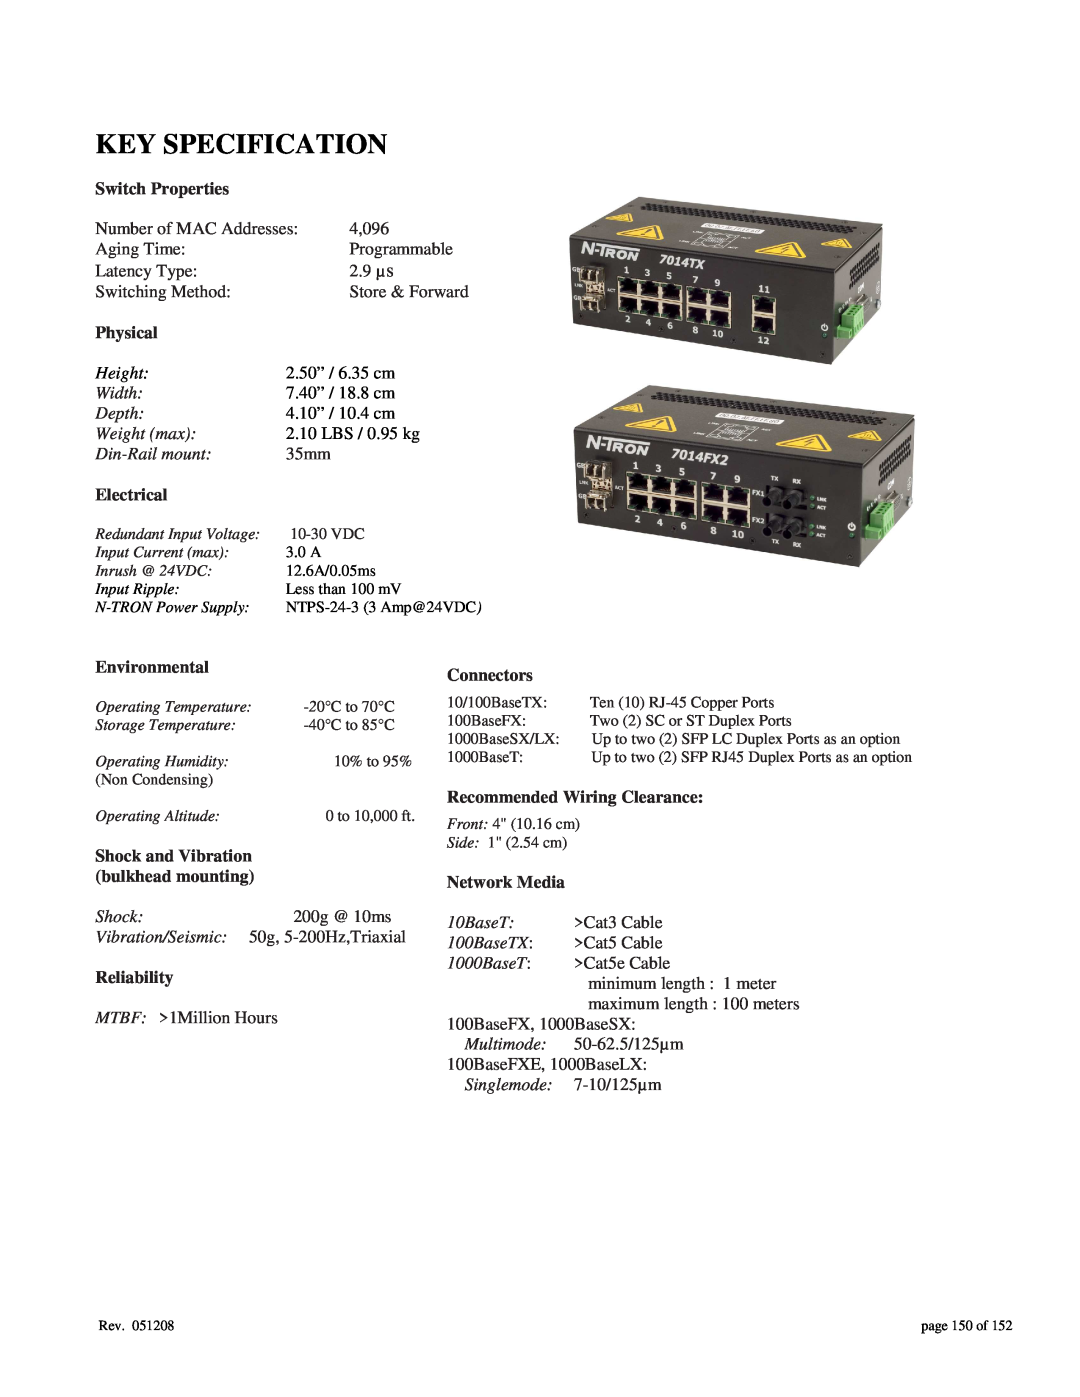 Gigabyte 7014 Key Specification, Switch Properties, Physical, Electrical, Environmental, Shock and Vibration, Reliability 